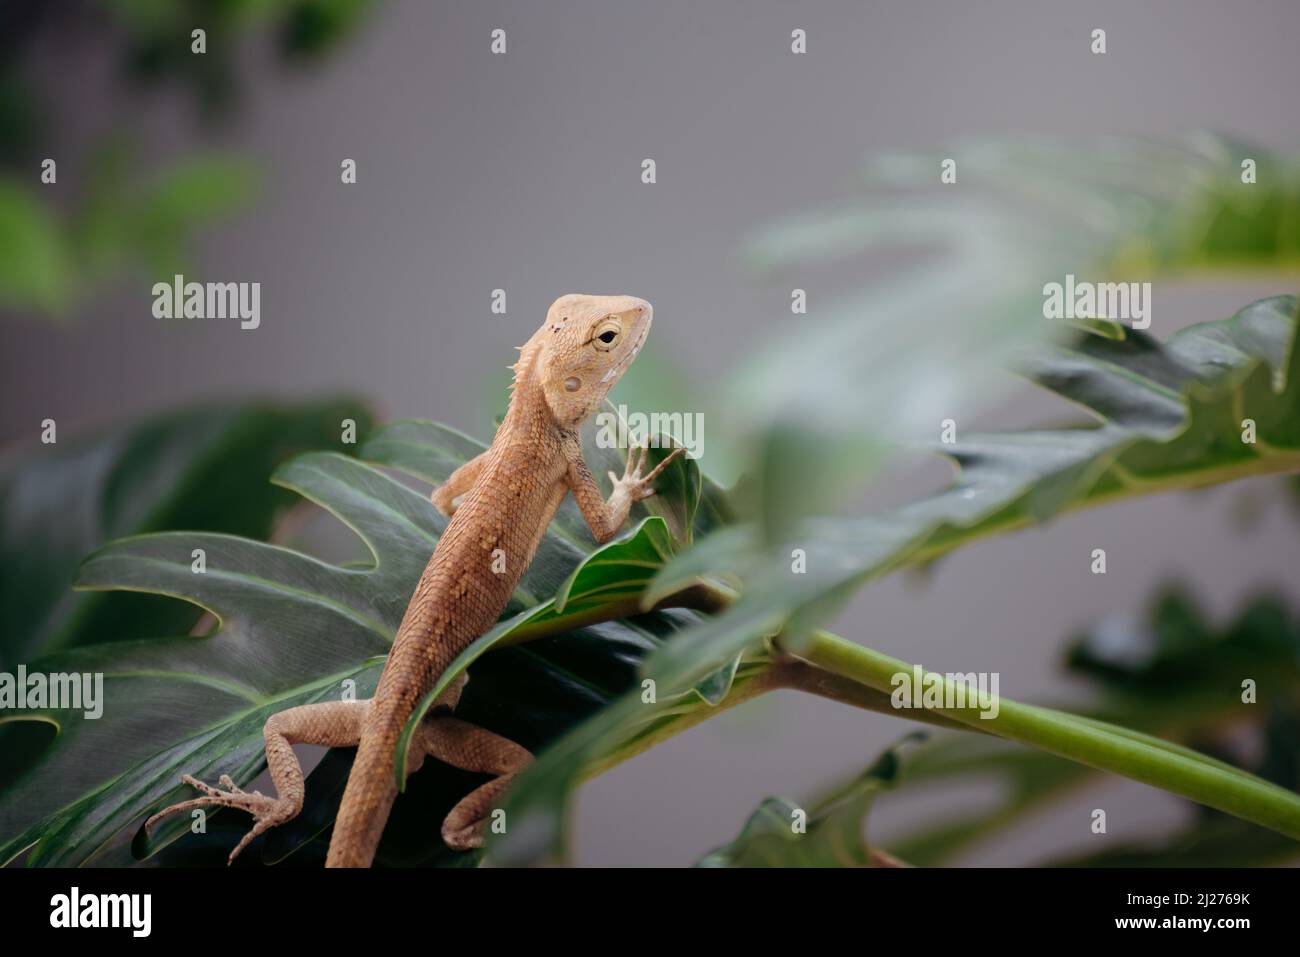 Emma Gray Forest Lizard - Calotes Emma, a beautiful colored lizard from Southeast Asian forests, Thailand. Stock Photo